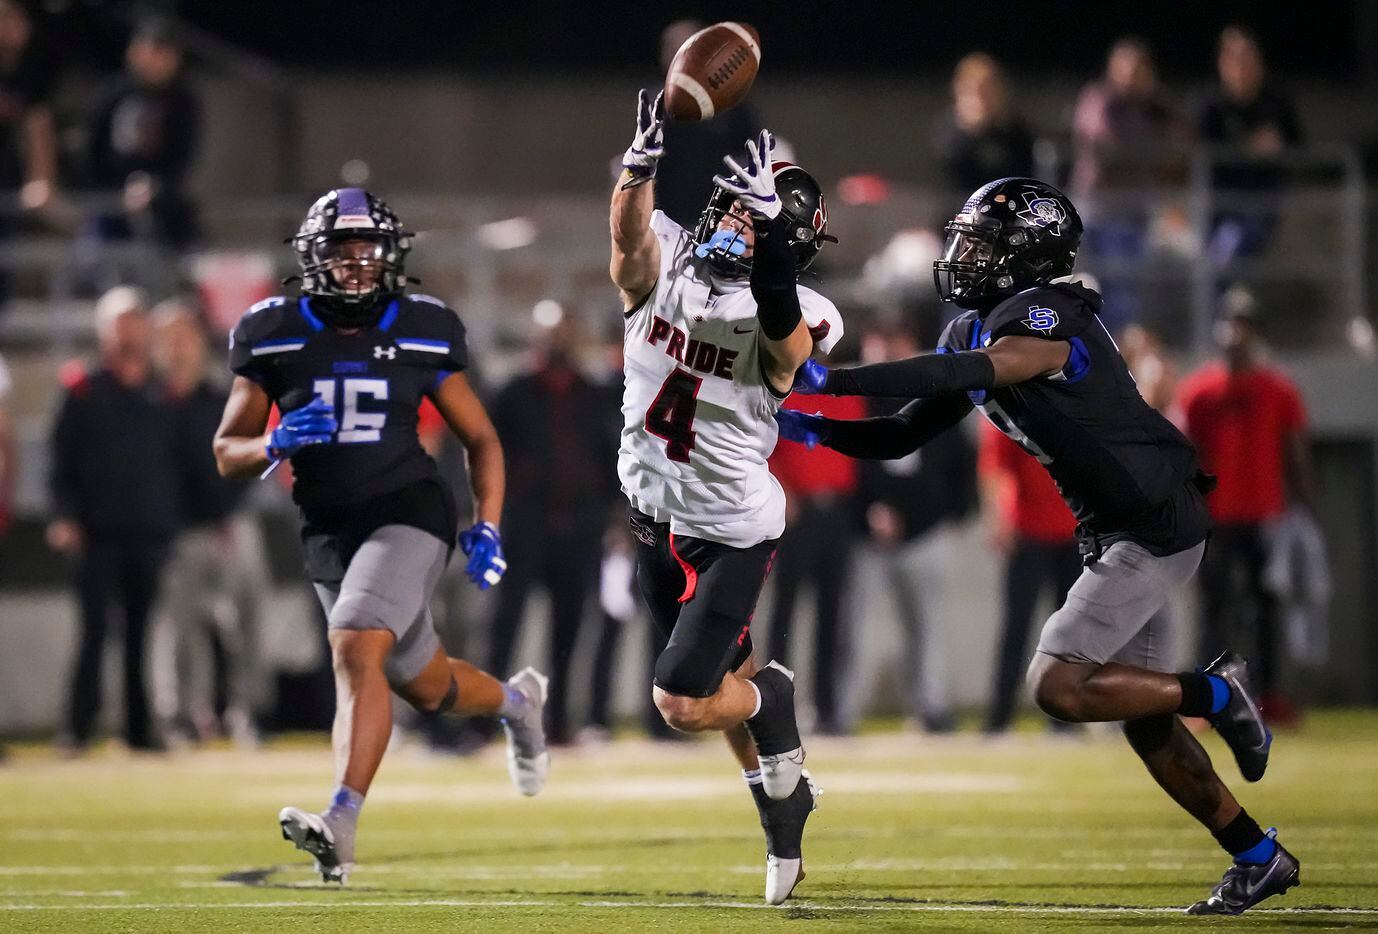 Colleyville Heritage wide receiver Hogan Wasson (4) has a pass go off his hands as Mansfield Summit defensive back Tavare Smith Jr. (9) defends during the second half of the Class 5A Division I Region I final on Friday, Dec. 3, 2021, in North Richland Hills, Texas. (Smiley N. Pool/The Dallas Morning News)